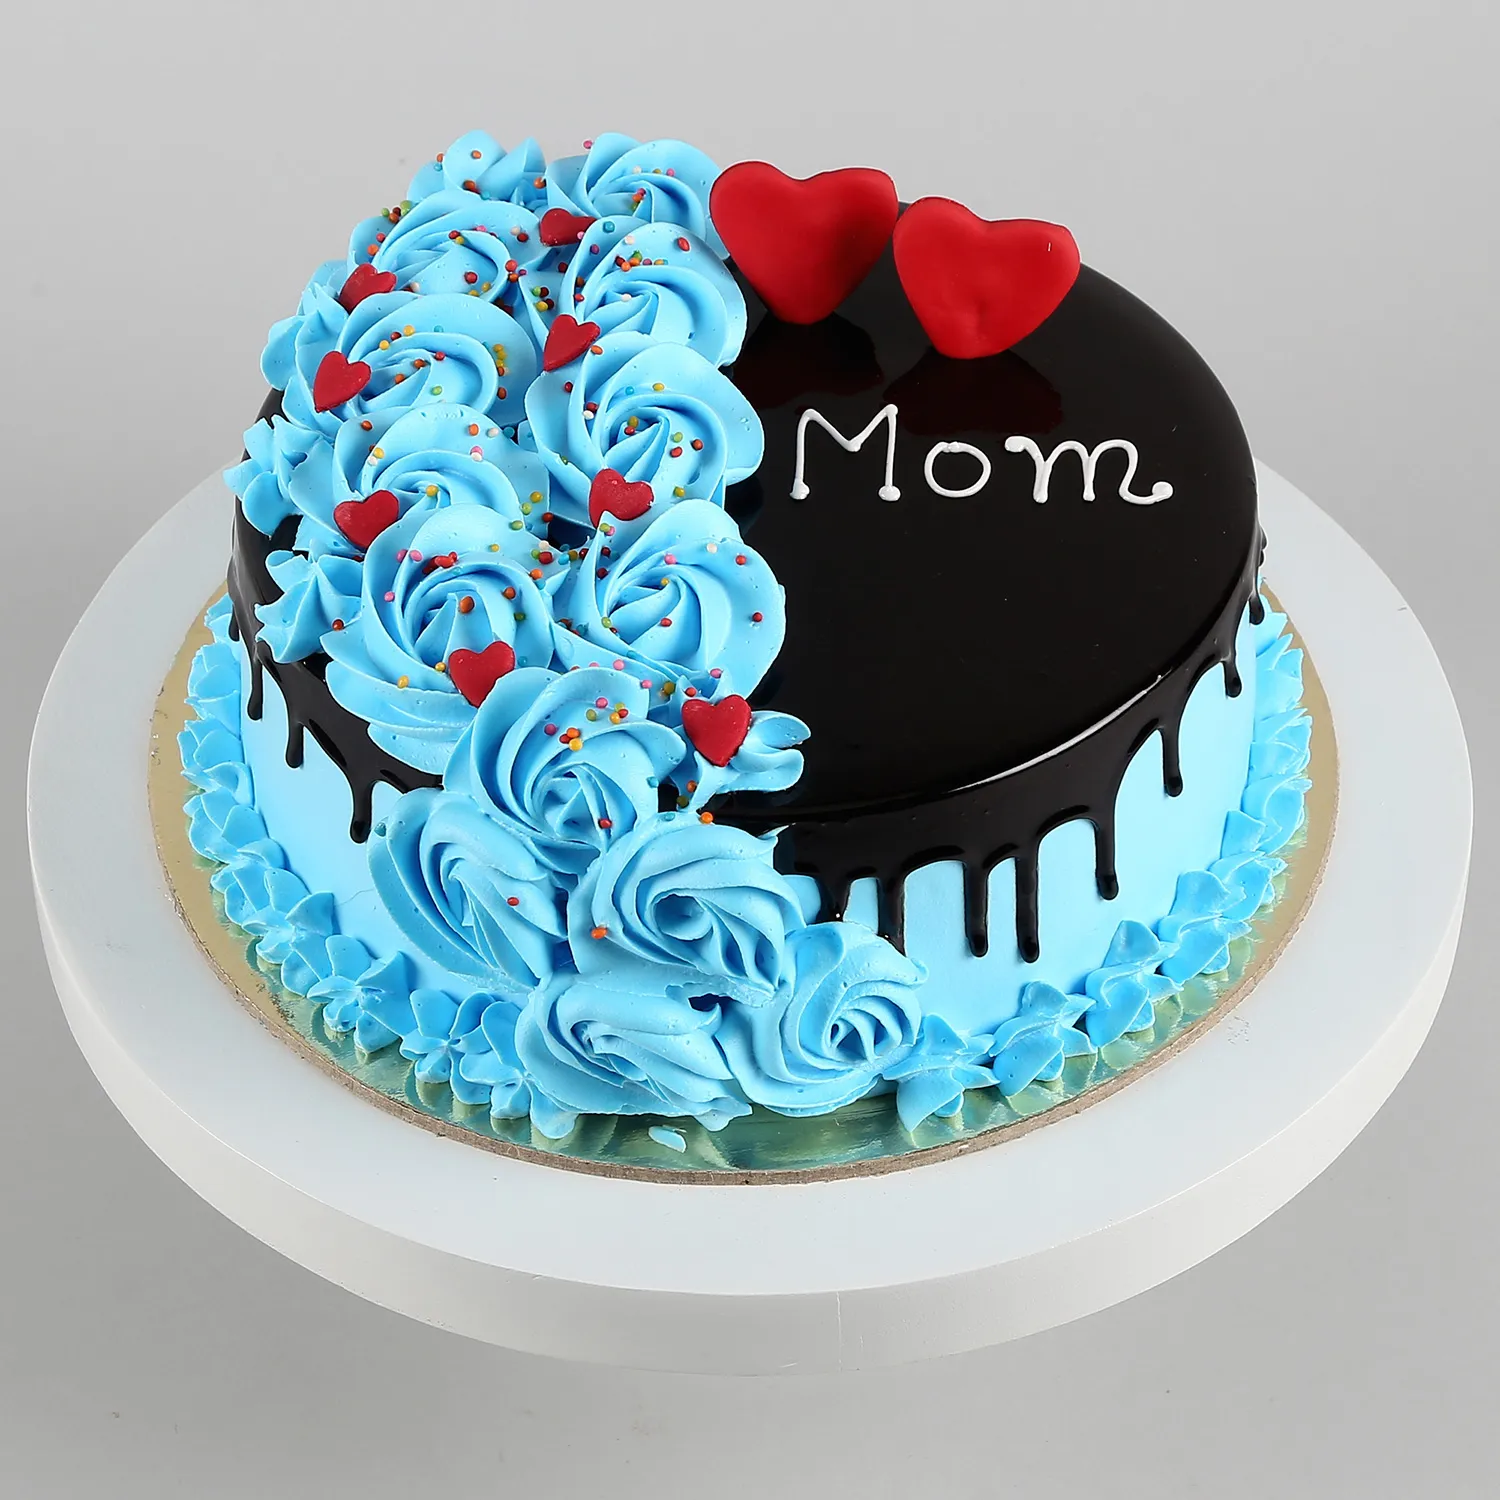 Special Cake For Mother's Day ❤ : r/CAKEWIN